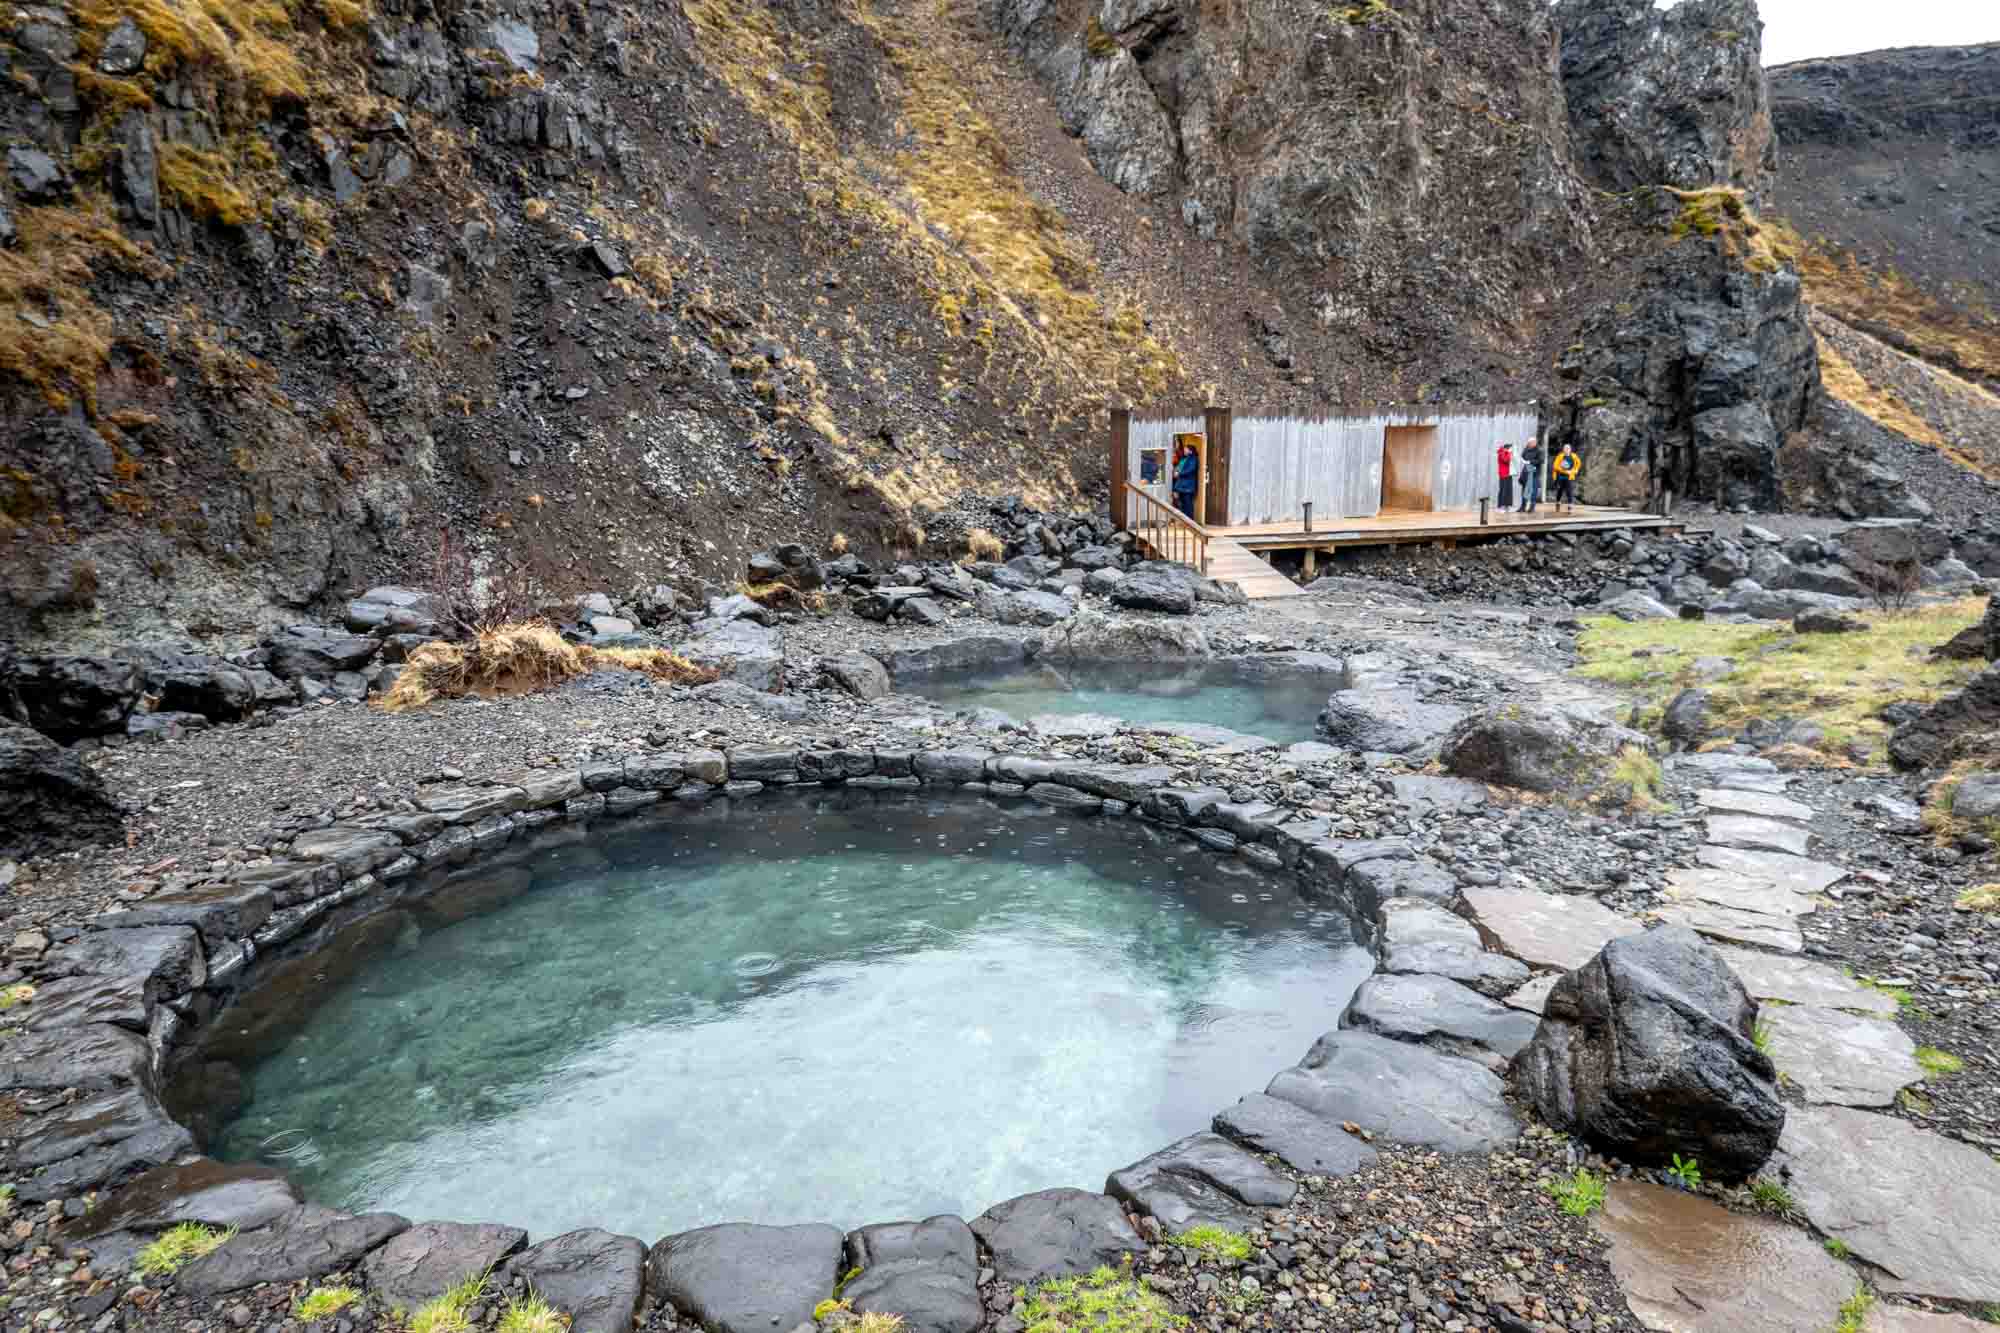 Two pools in a deep canyon with wooden changing booth